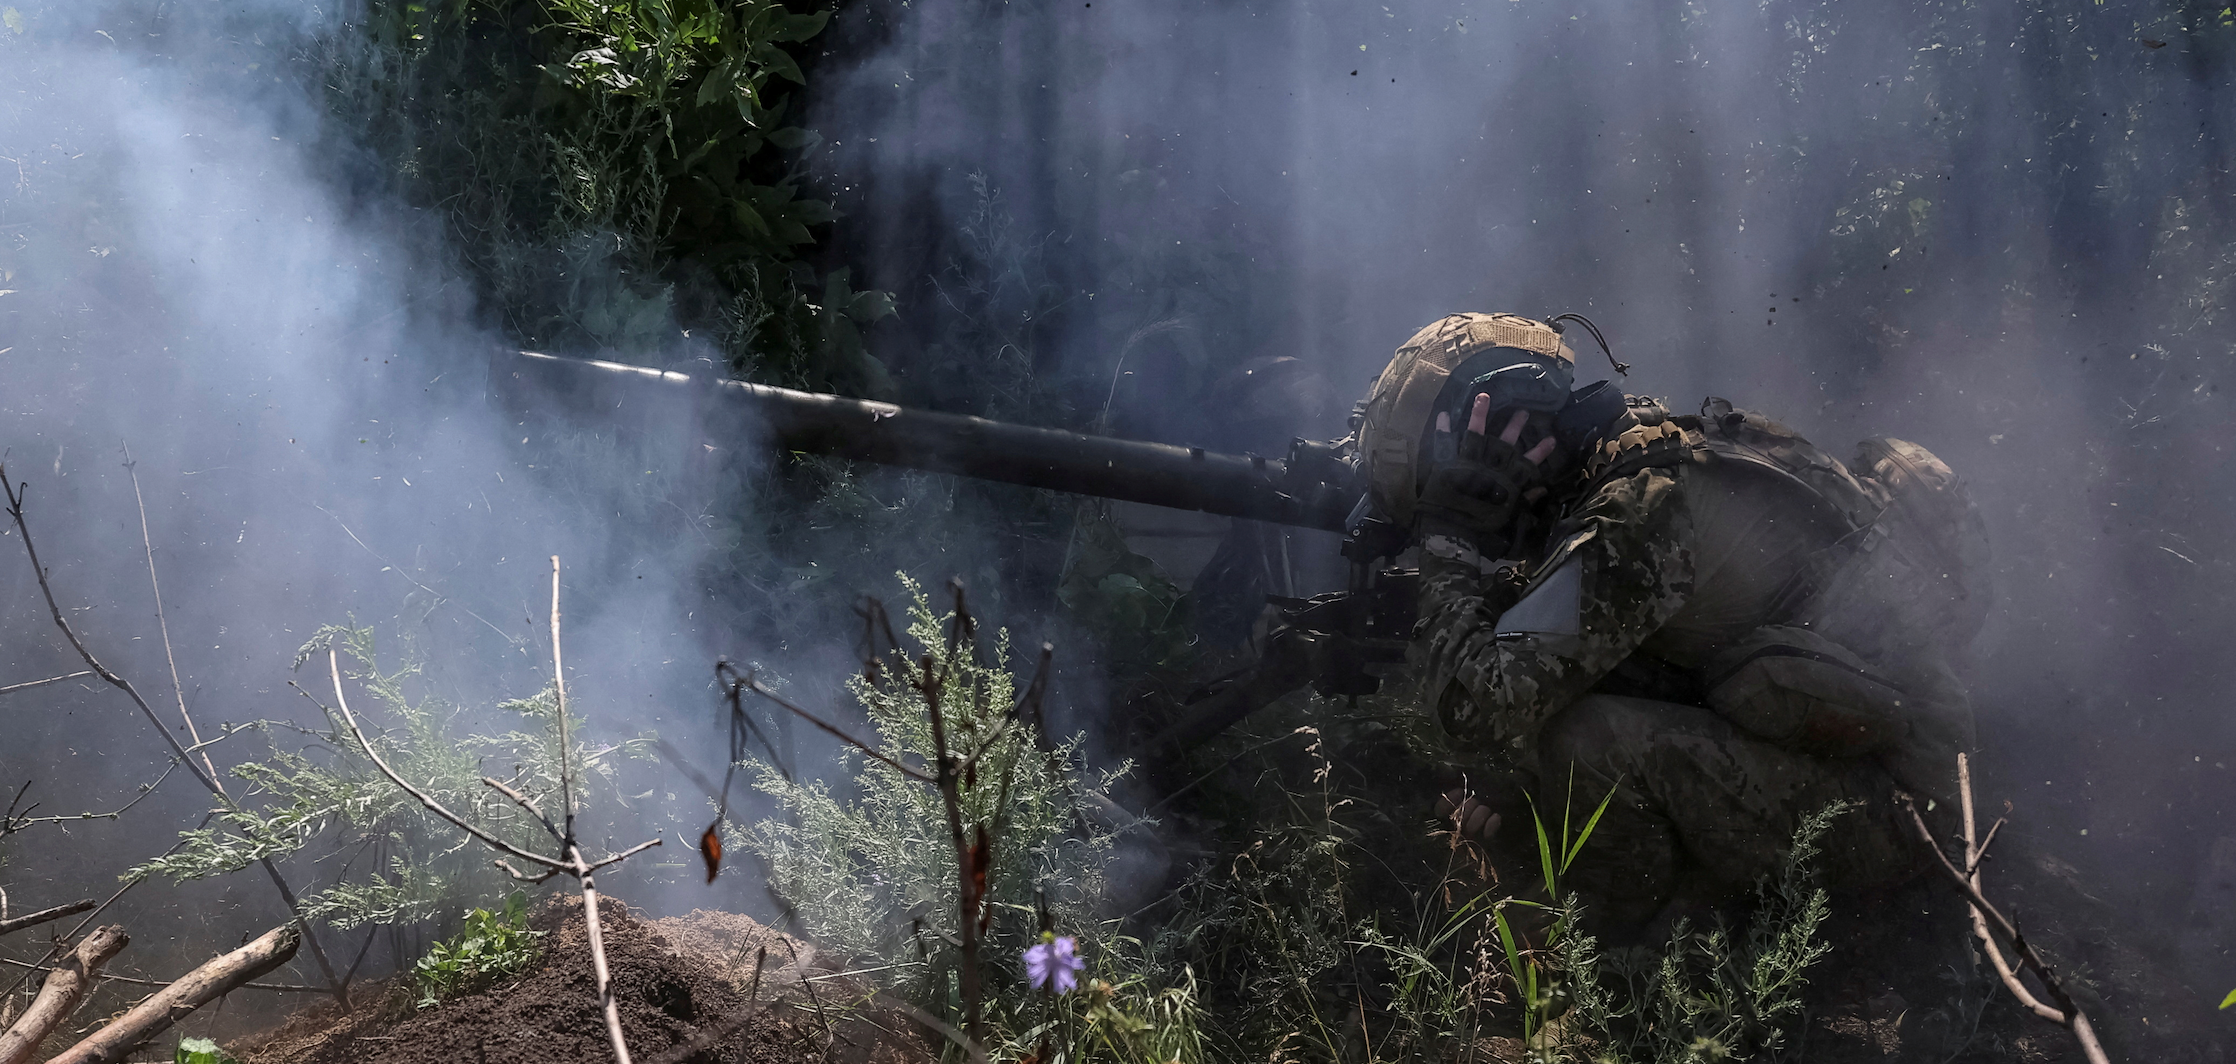 A Ukrainian serviceman, of the 10th separate mountain assault brigade of the Armed Forces of Ukraine